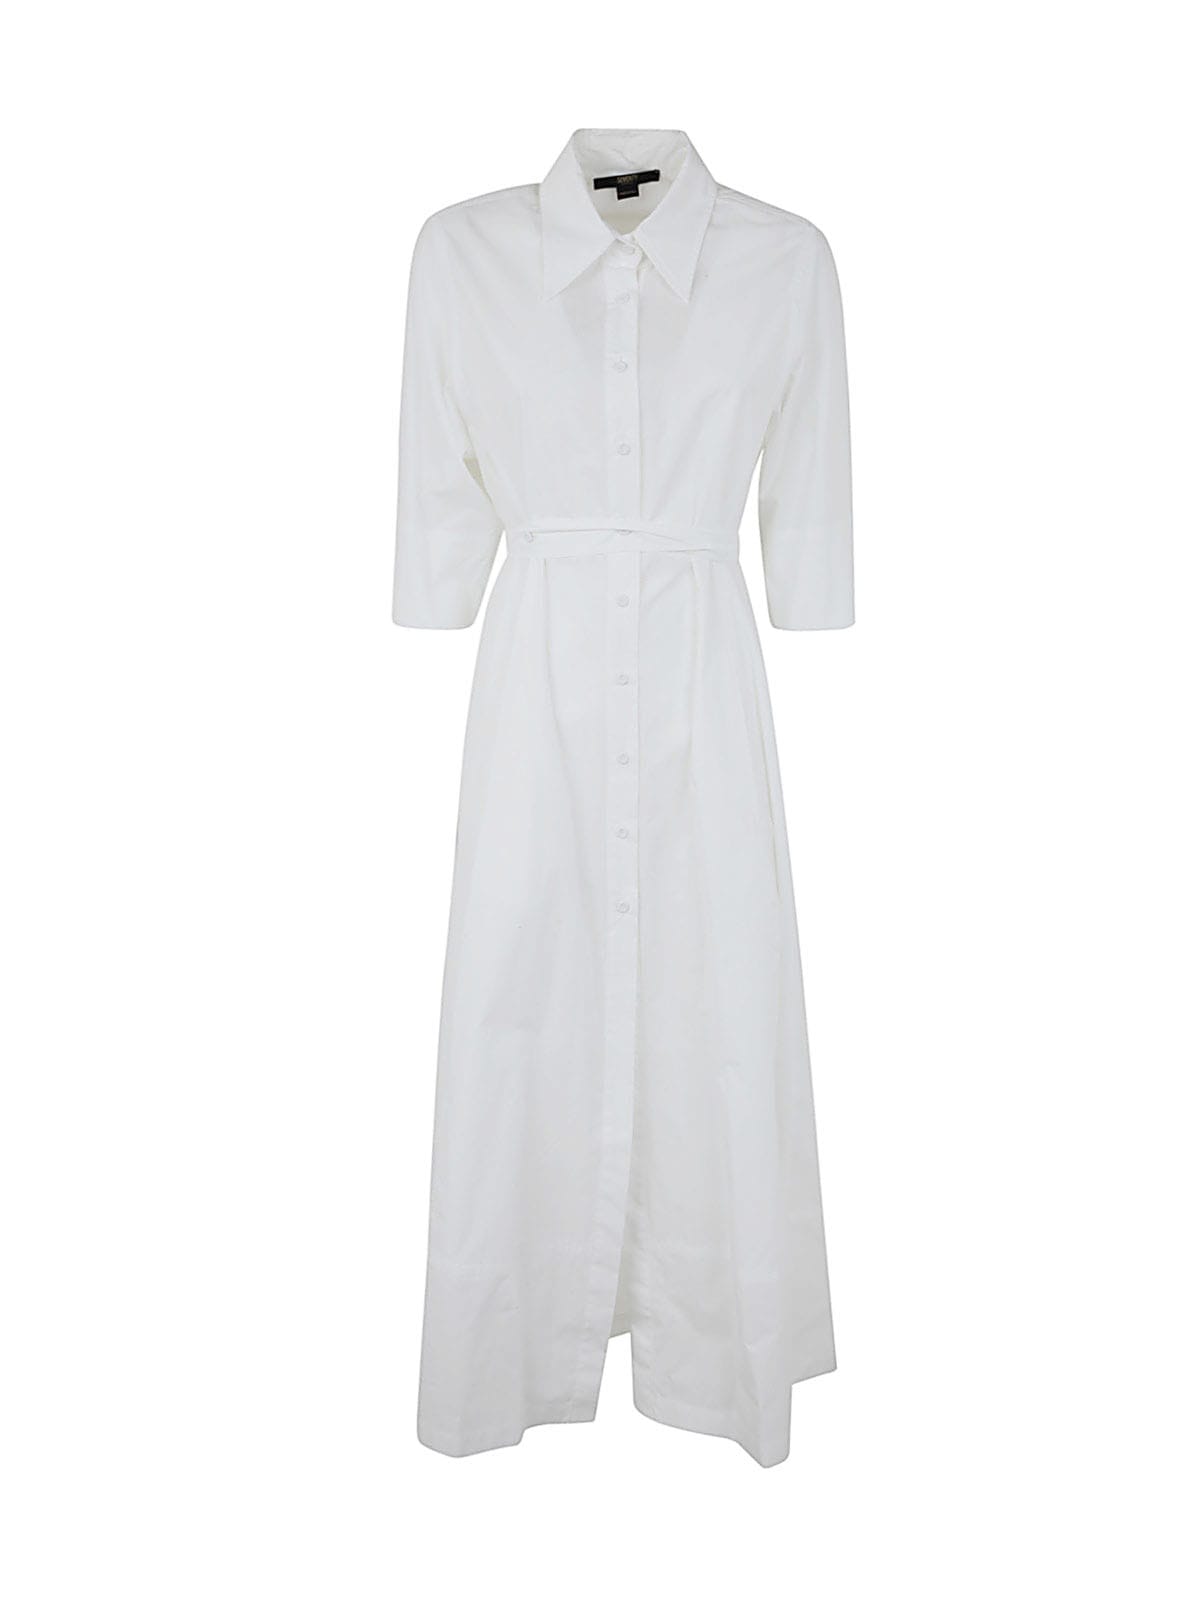 SEVENTY CHEMISIER DRESS WITH MEDIUM SLEEVES, BELT AND BUTTONS